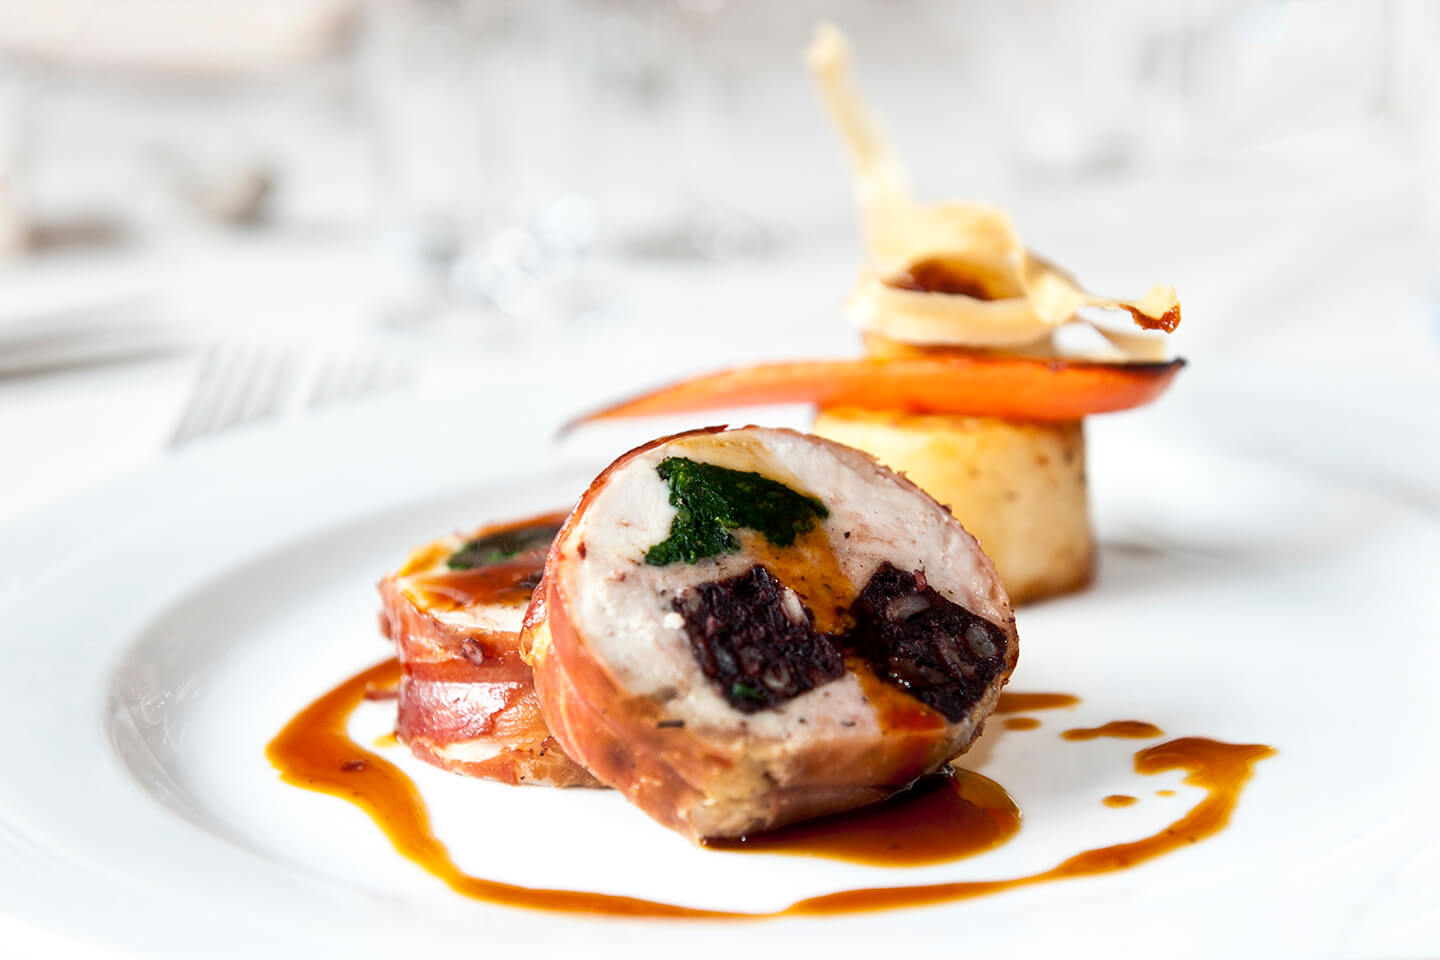 Choose a delicious pork dish for your autumn wedding food at this country wedding venue